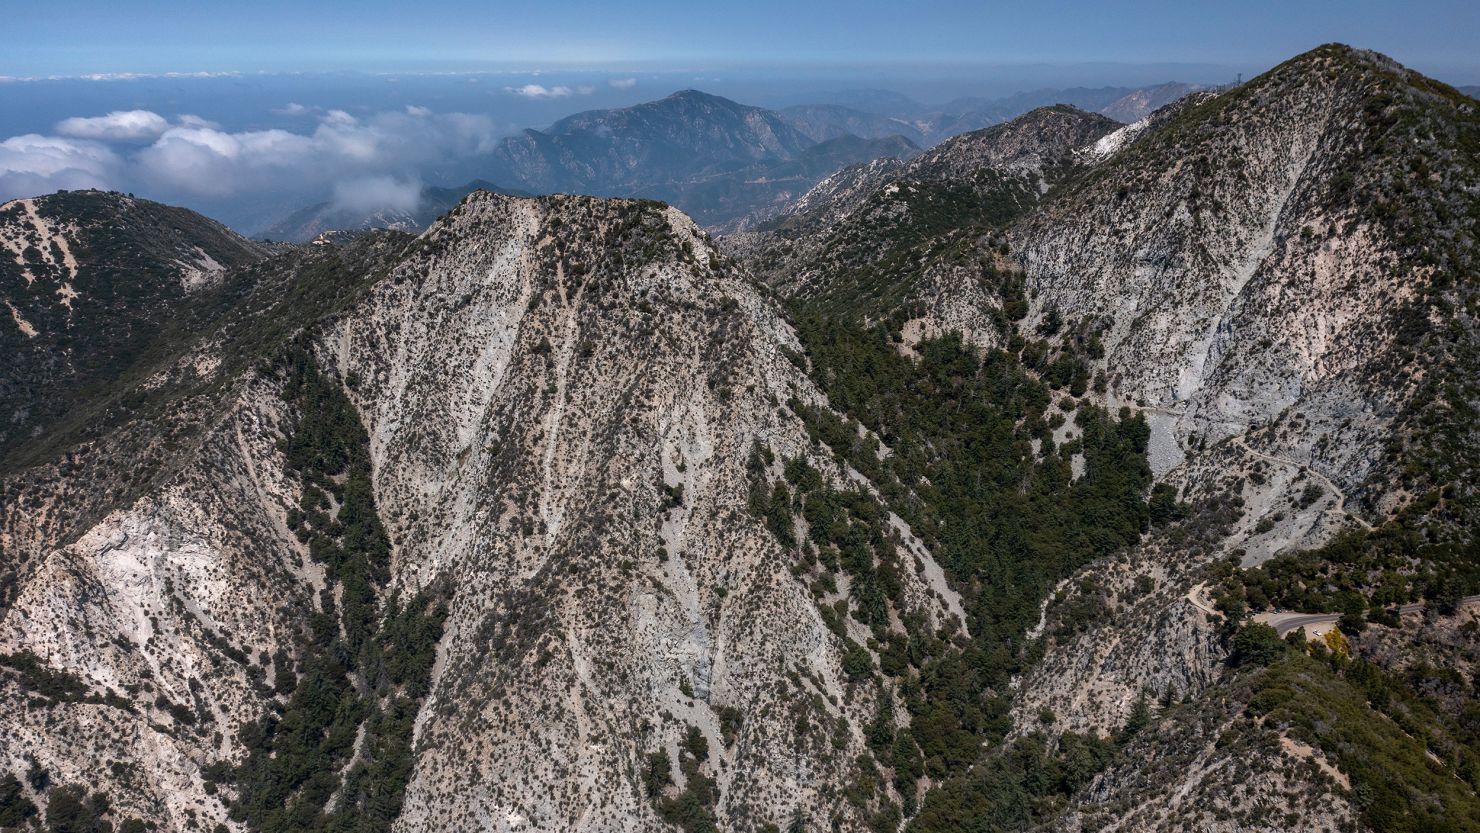 The San Gabriel Mountains National Monument is one of two monuments the Biden administration intends to expand, people familiar with the plan told CNN.